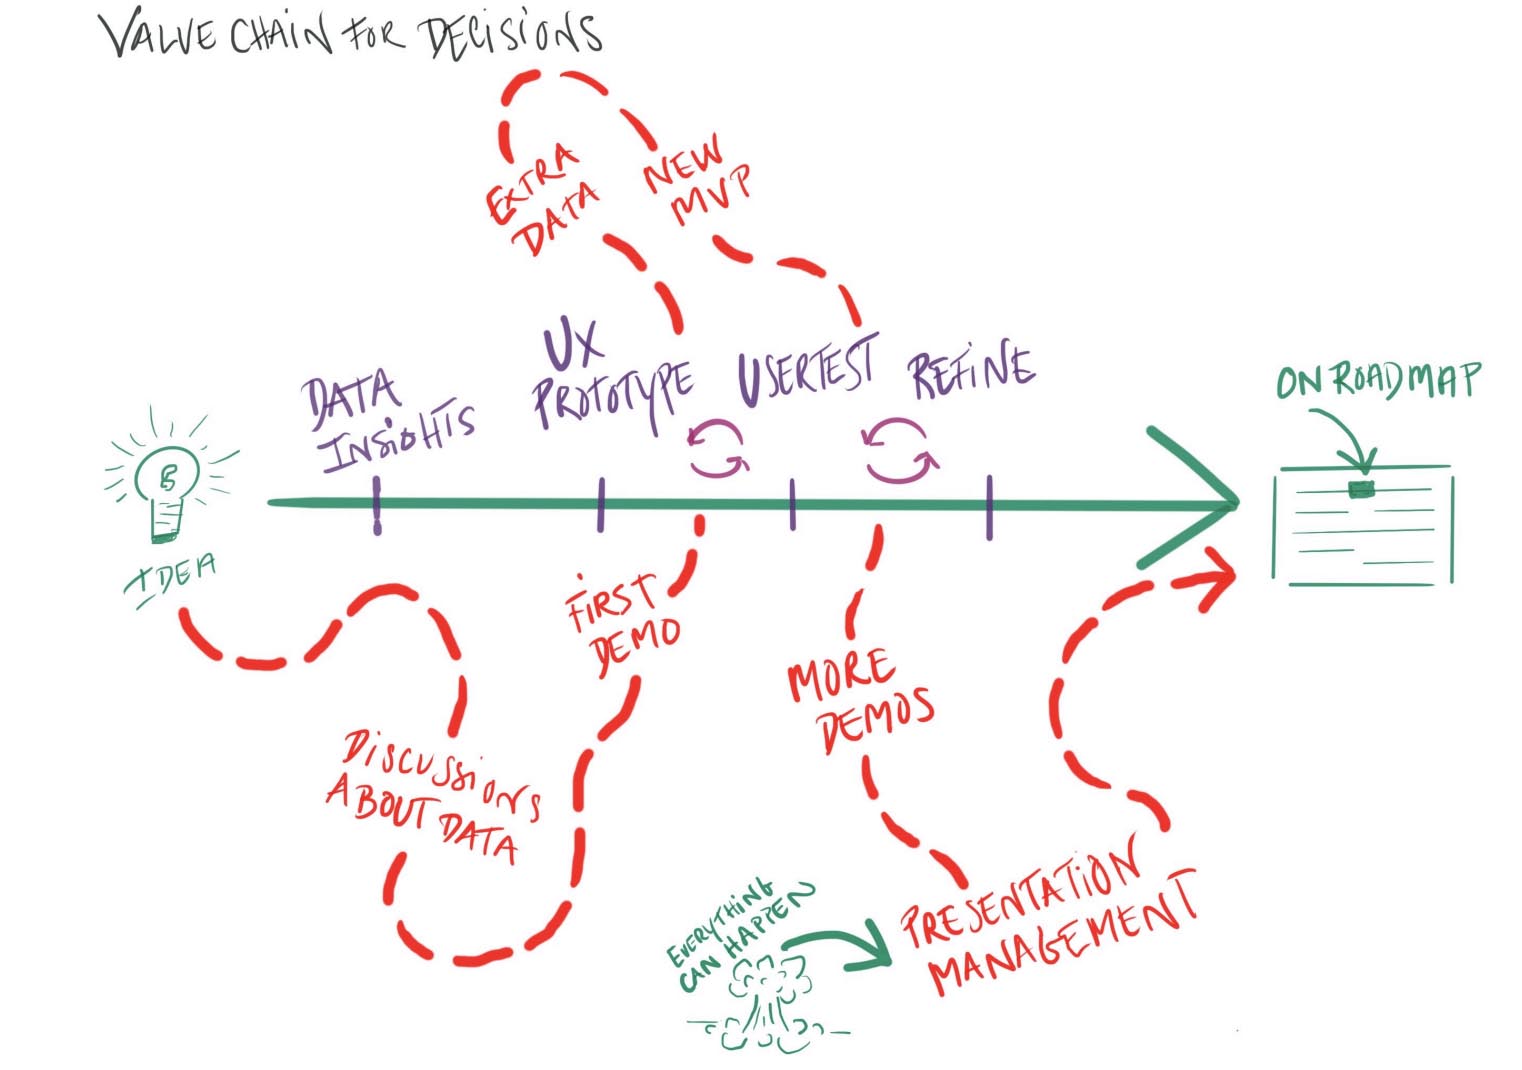 The Value Chain of Decisions